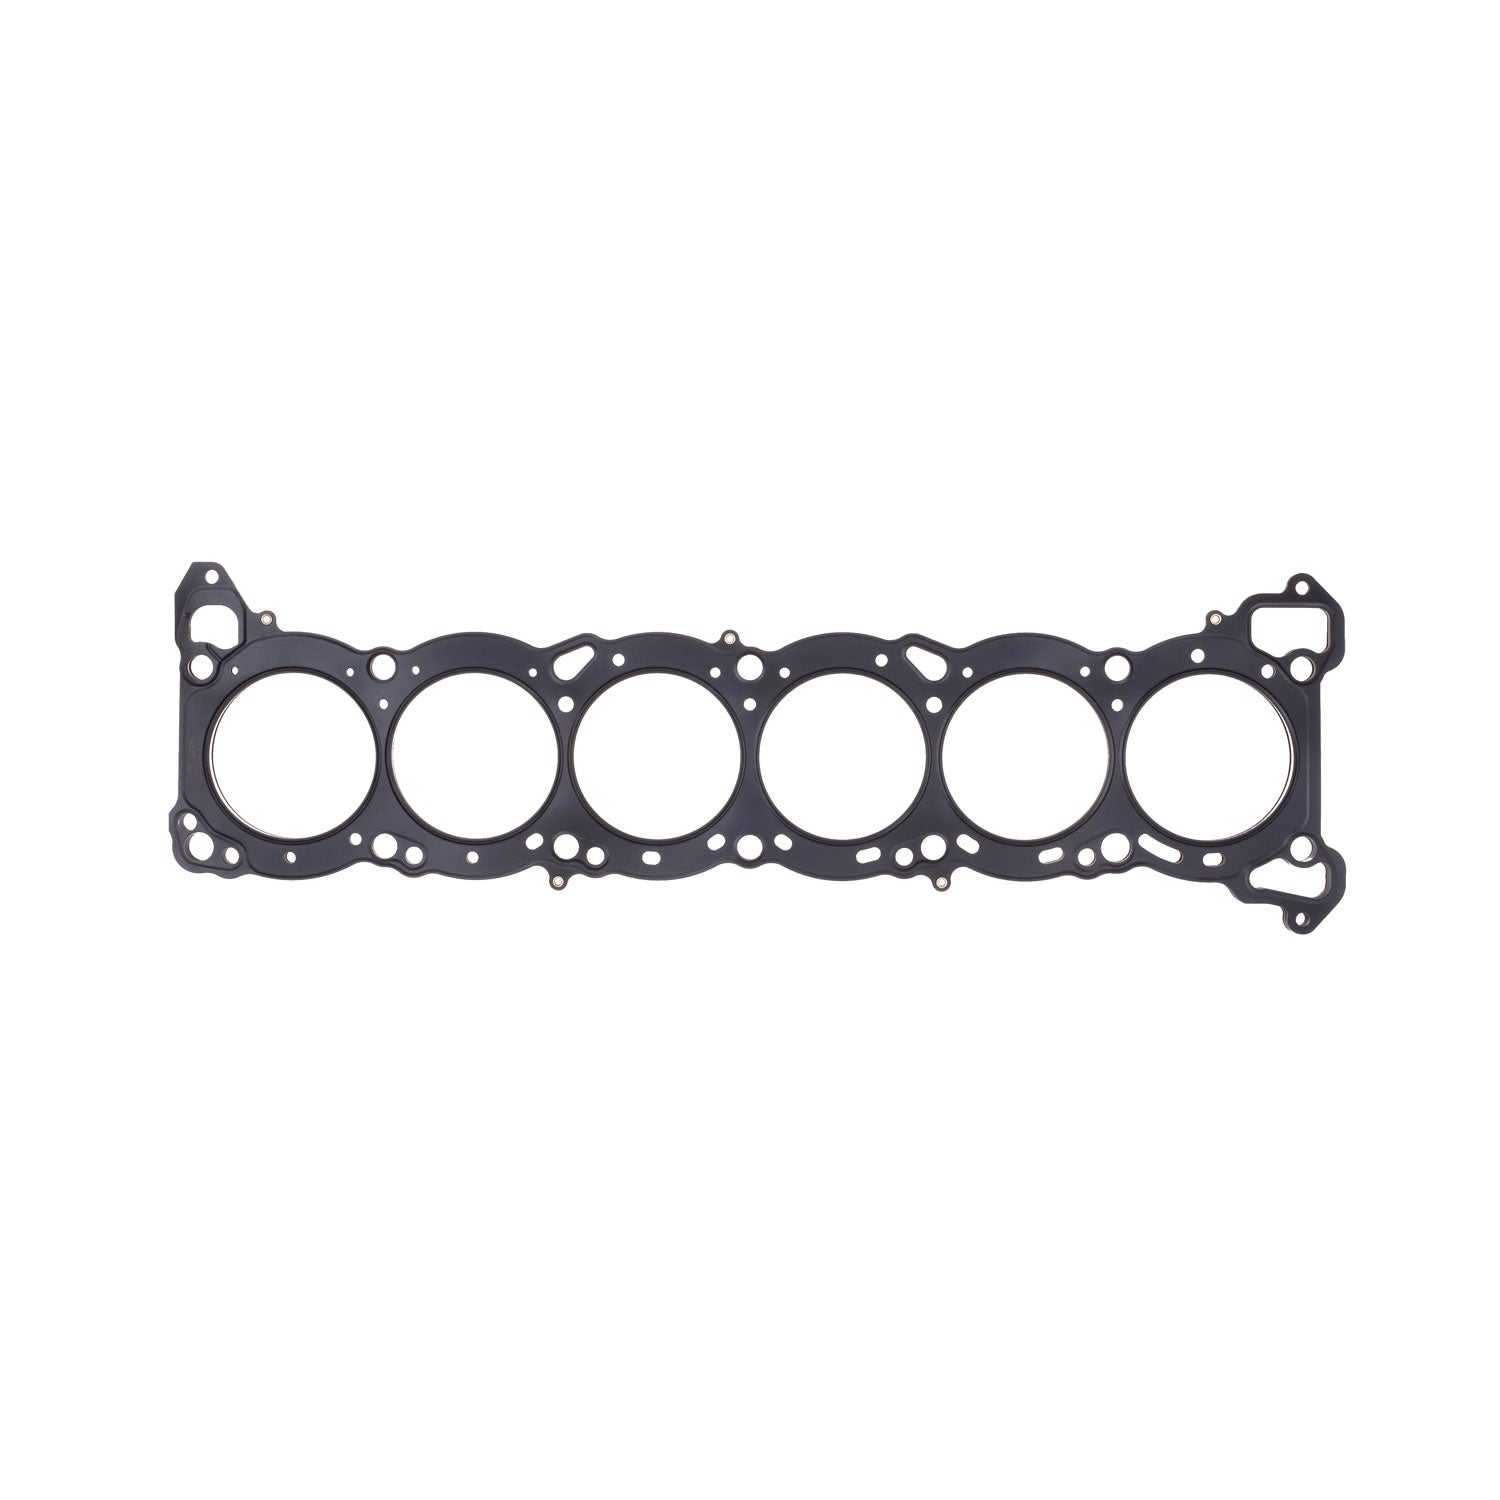 Cometic Nissan RB30 Head Gasket 1.0mm Thick - C4323-040